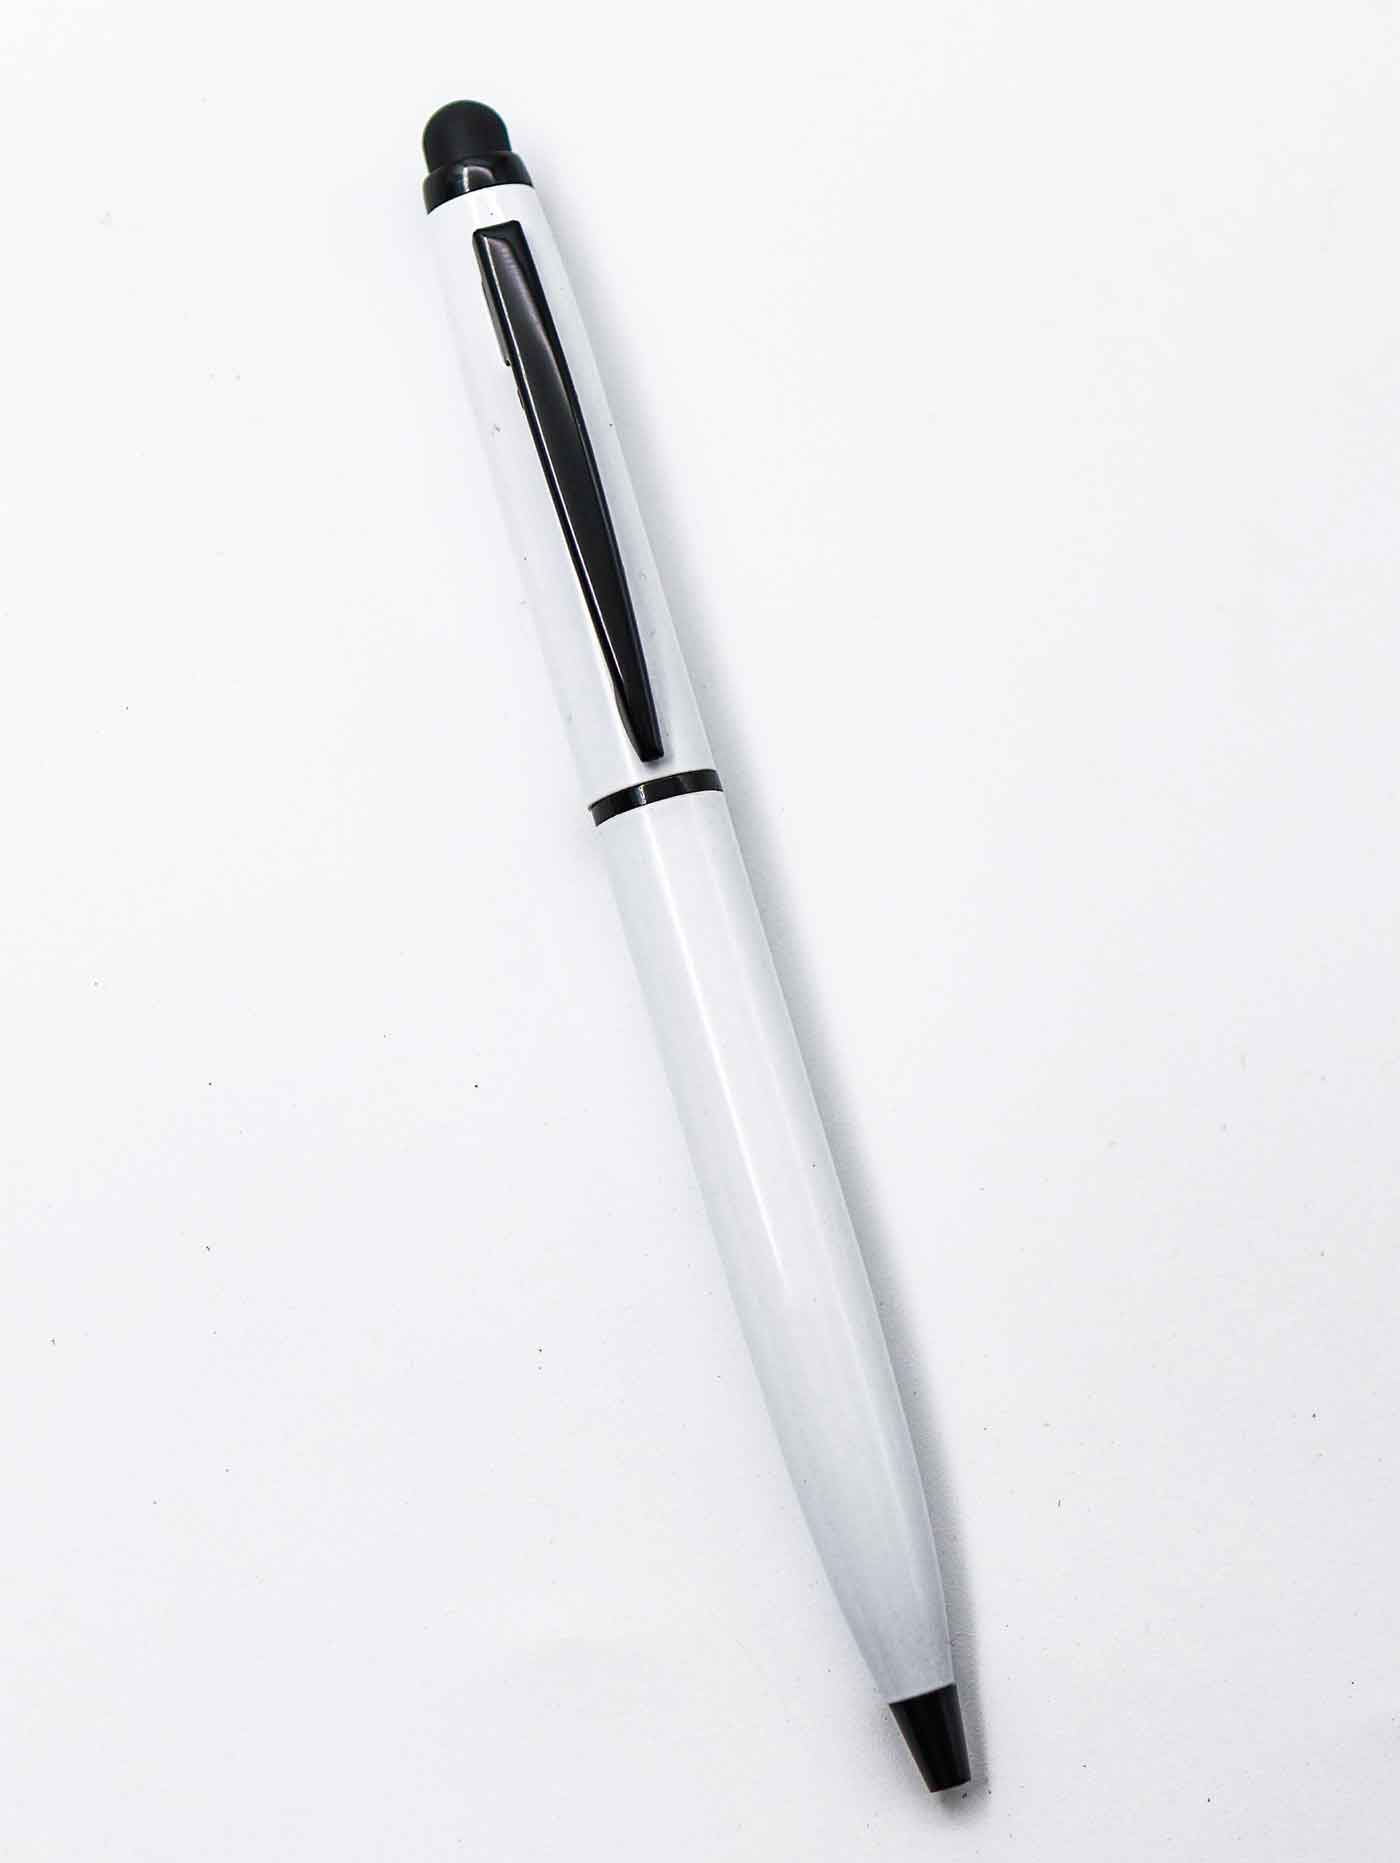 Penhouse.in Stylus White Body With Black Clip And Trim Medium Tip Twist Type Ball Pen SKU 25193